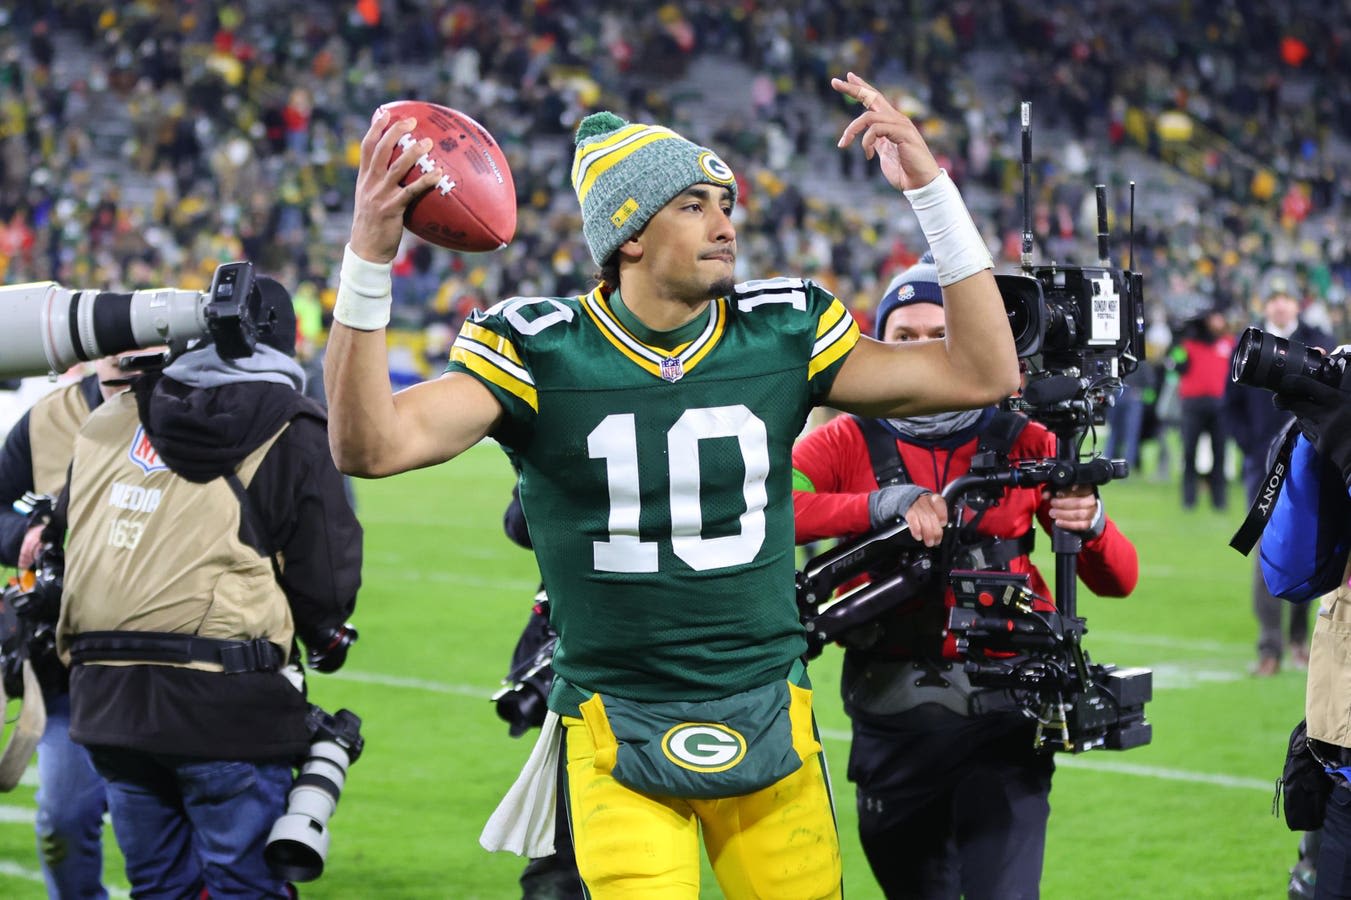 Three Bets You Should Make On The Green Bay Packers